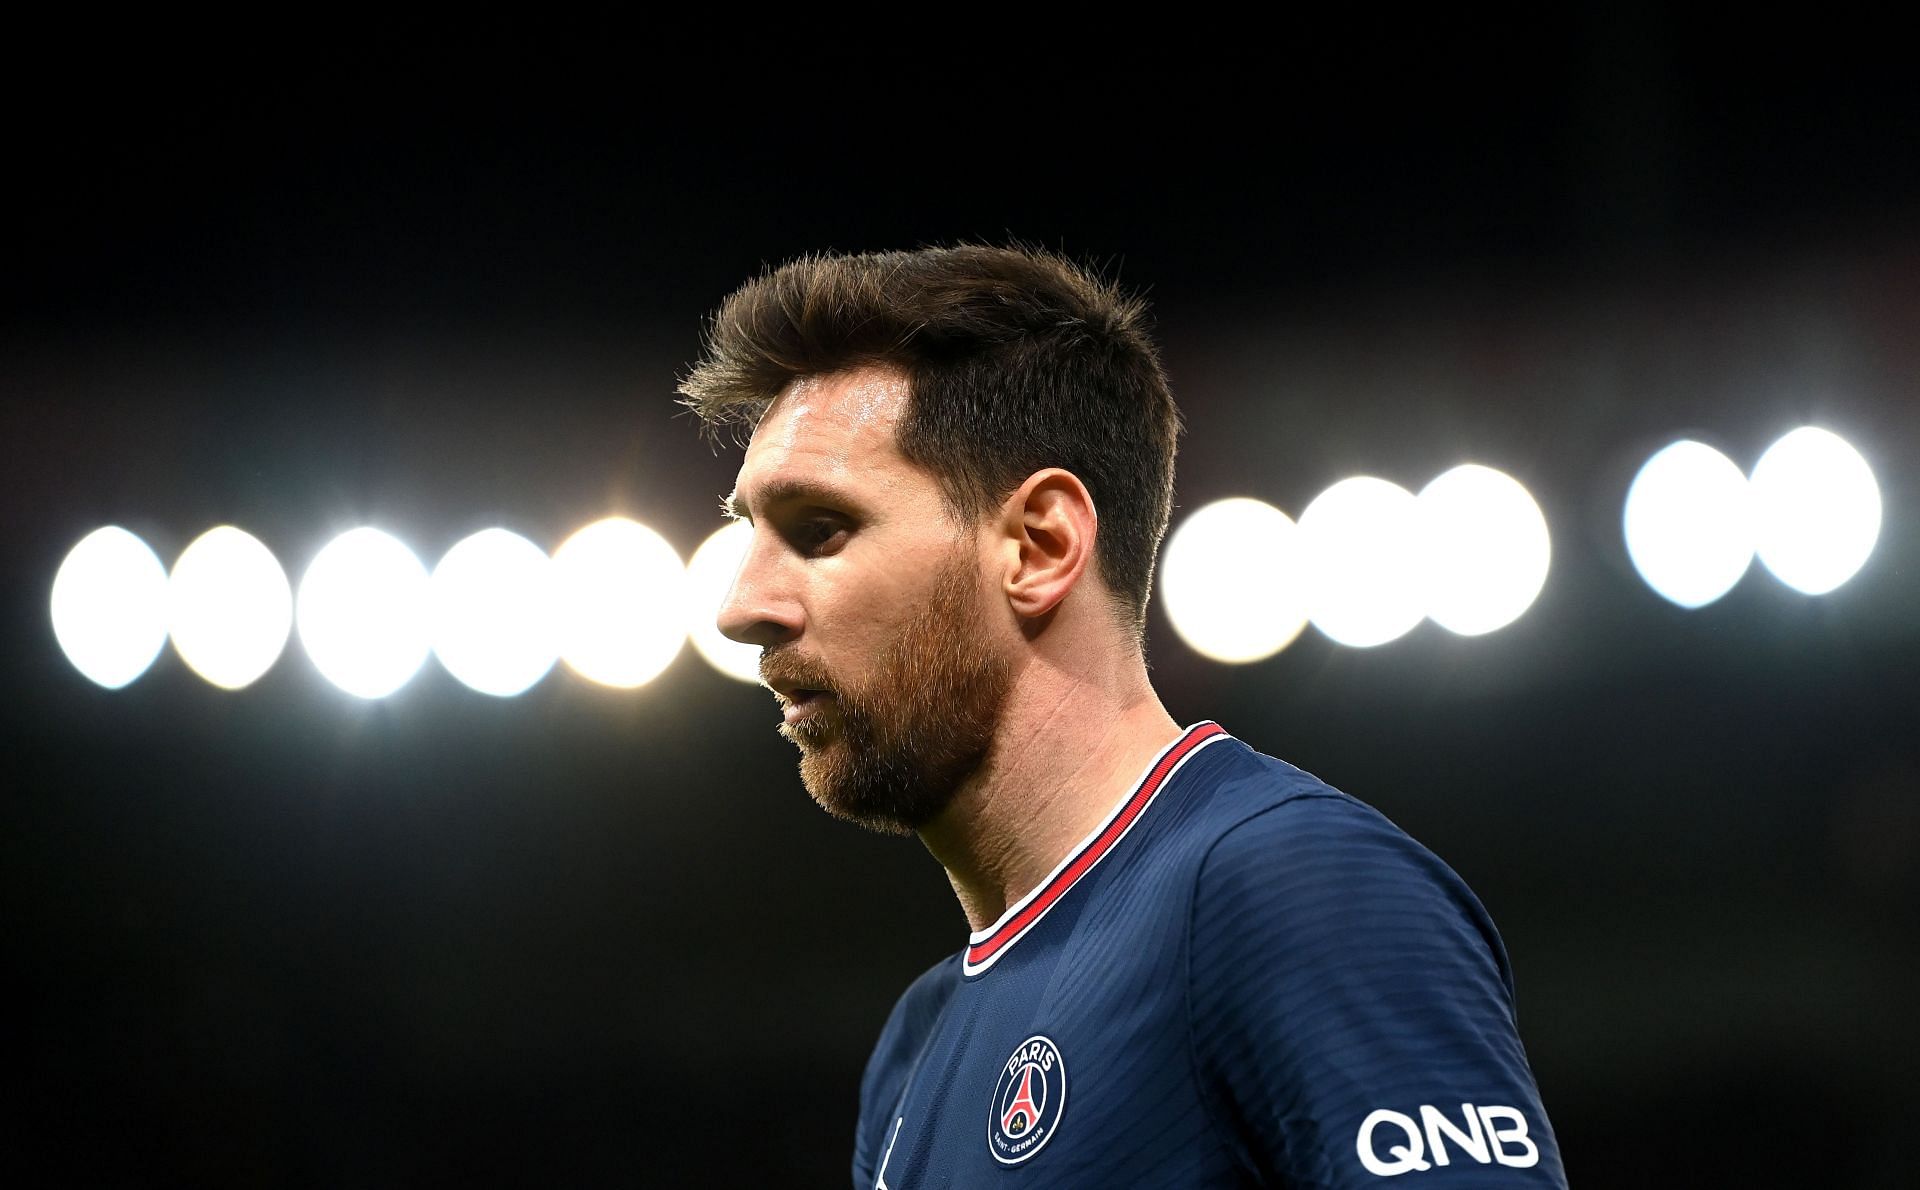 PSG forward Lionel Messi. (Photo by Shaun Botterill/Getty Images)